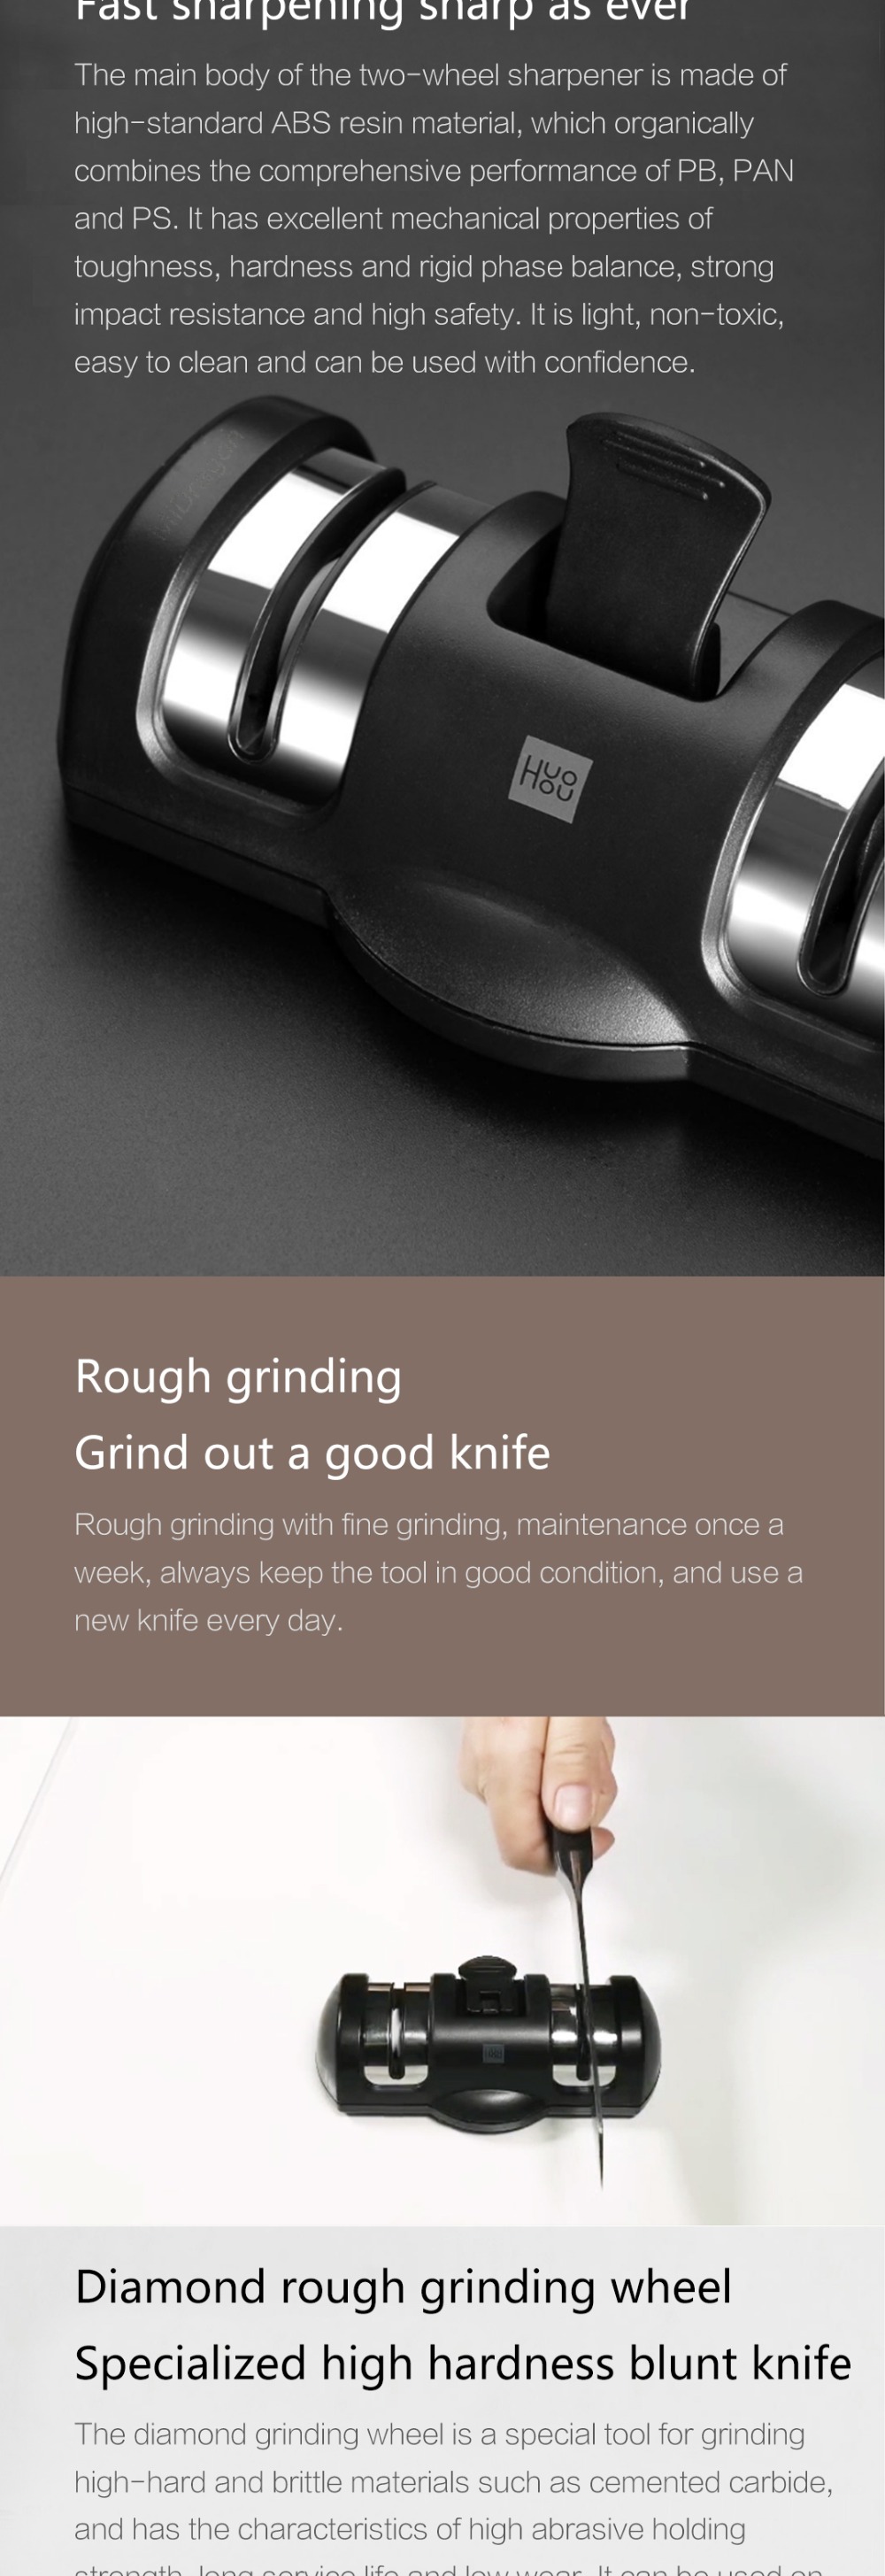 Huohou Knife Sharpener 2 Stages Double Wheel Whetstone Grinder Tool From Xiaomi